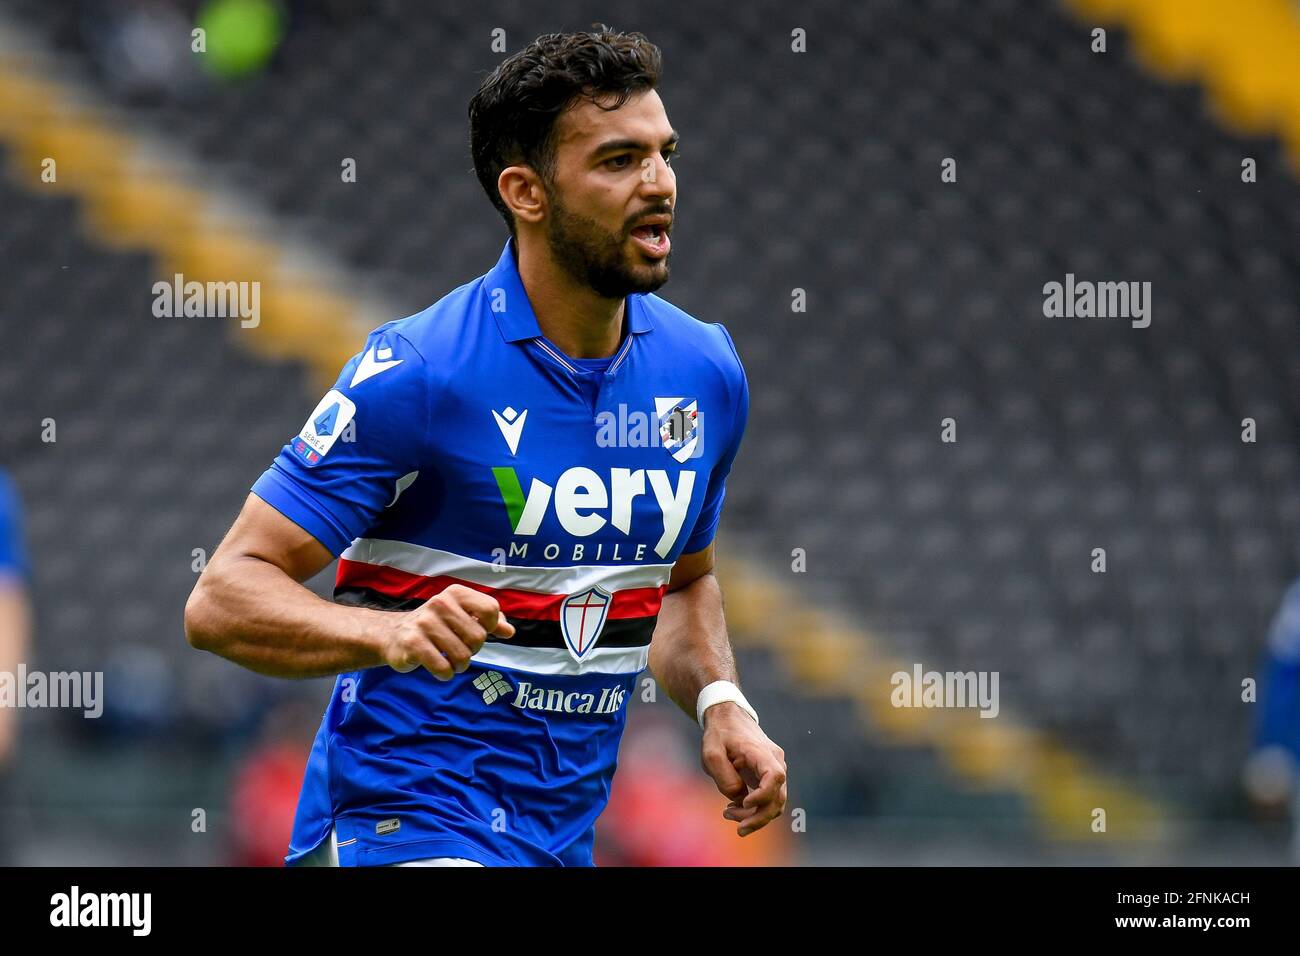 Udine, Italy. 16th May, 2021. Mehdi Leris (Sampdoria) during Udinese Calcio vs UC Sampdoria, Italian football Serie A match in Udine, Italy, May 16 2021 Credit: Independent Photo Agency/Alamy Live News Stock Photo